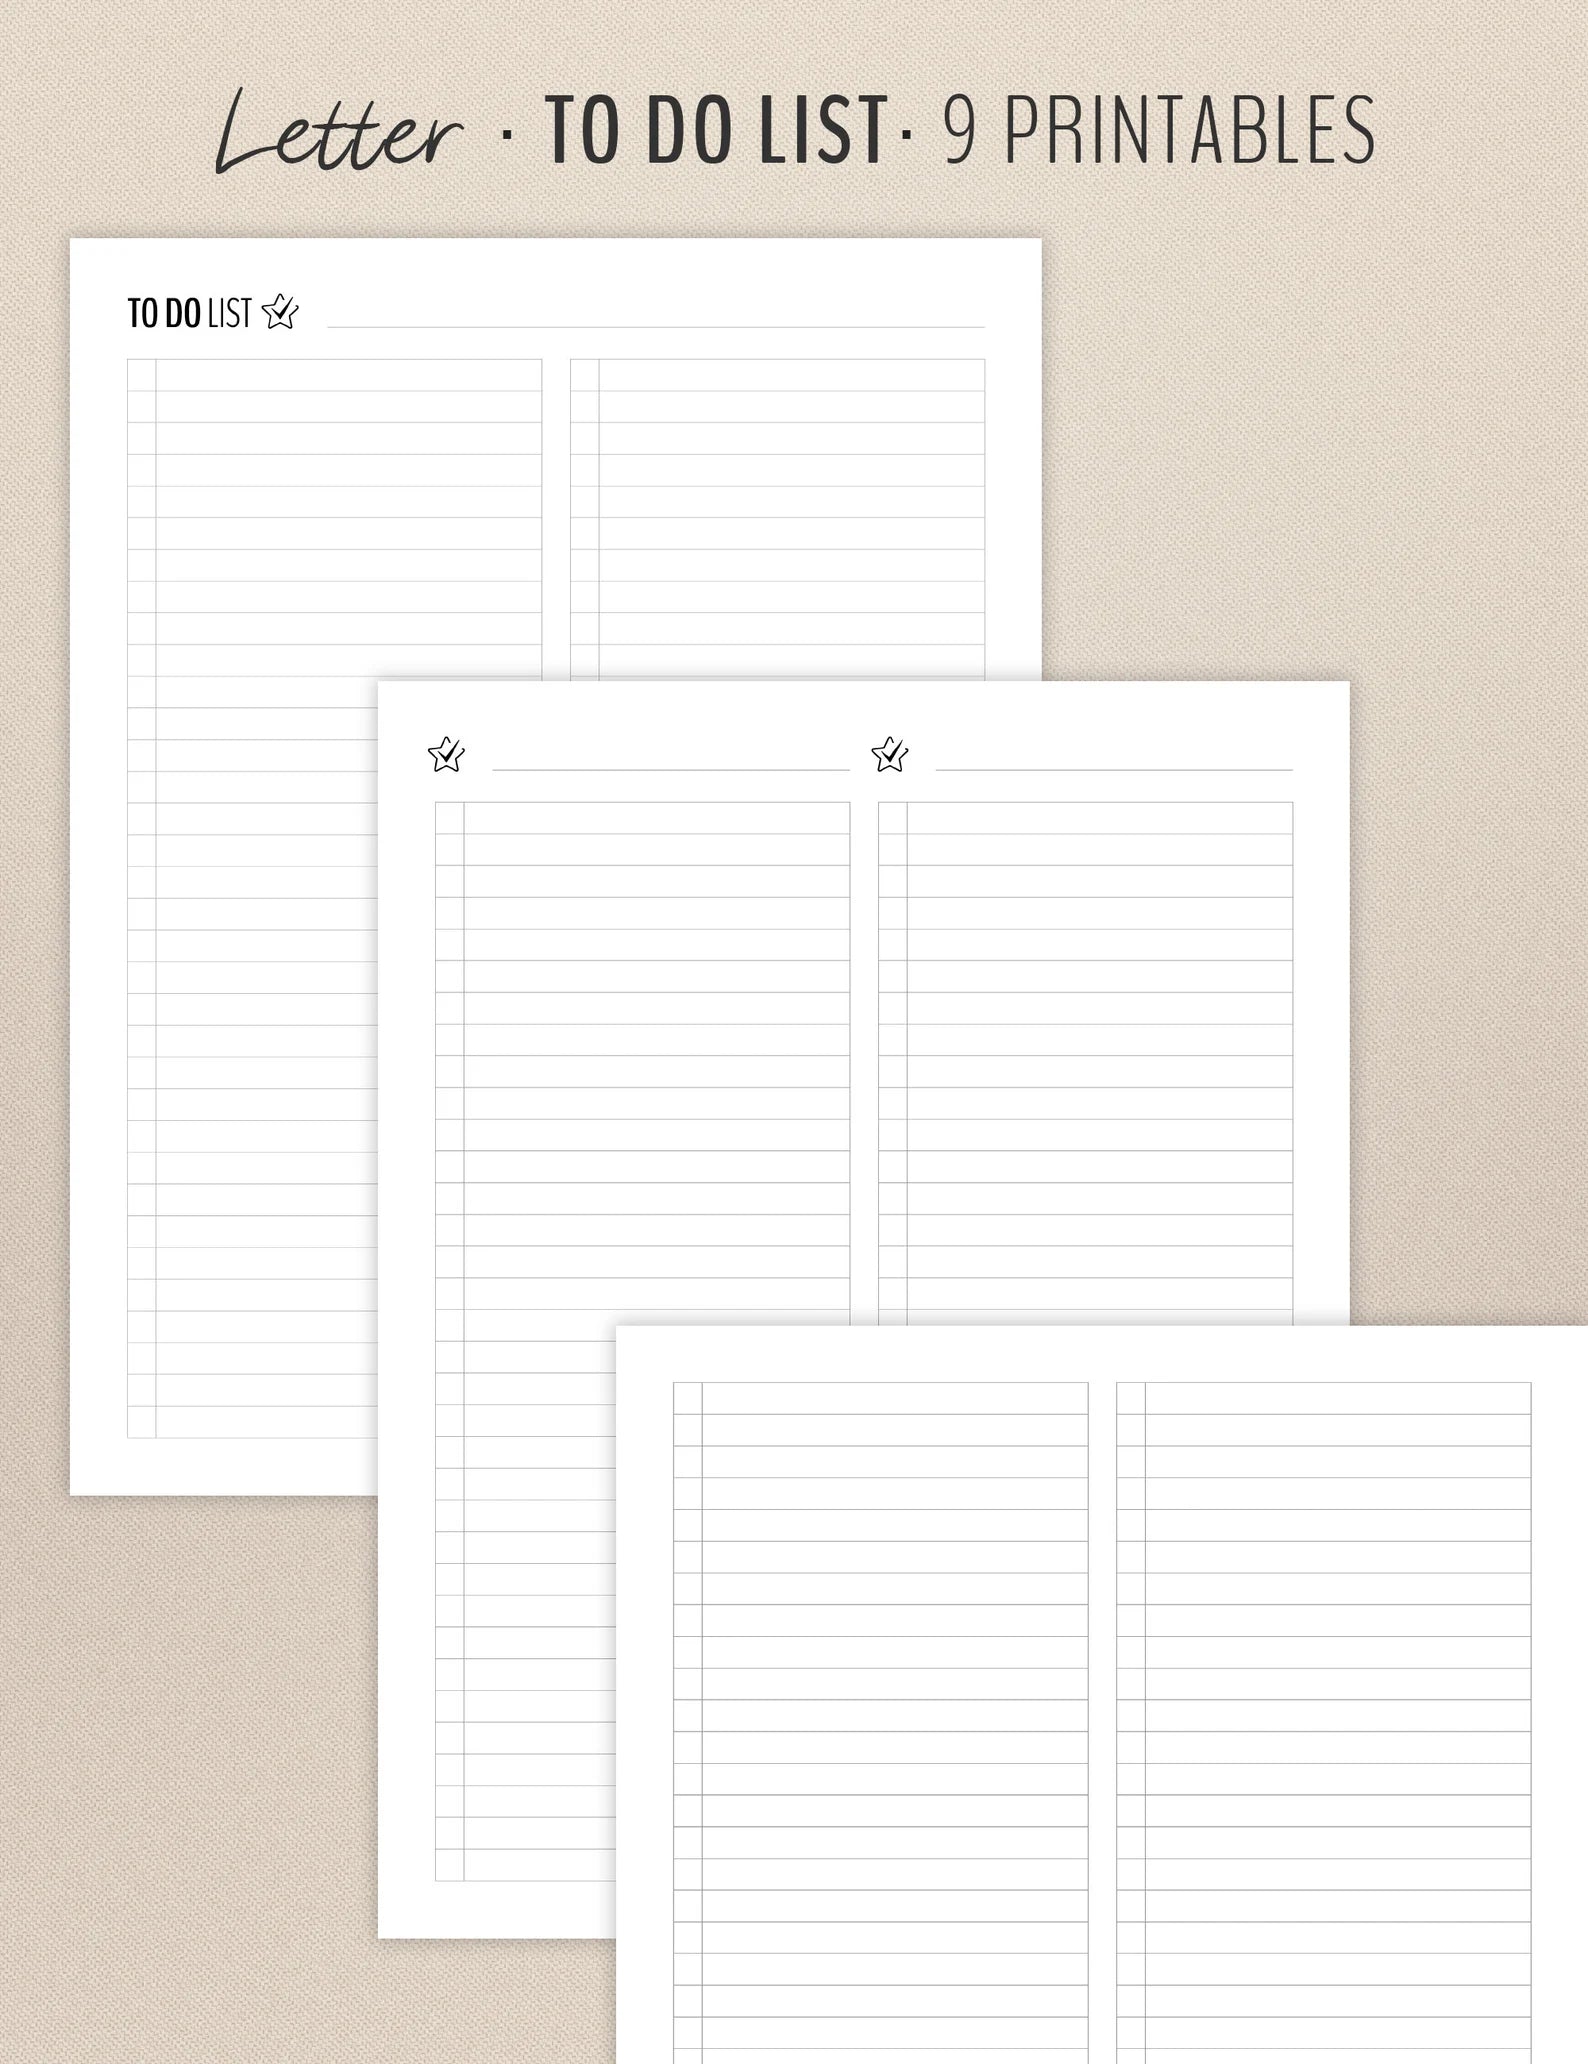 To Do List - Printable Planner Inserts _ letter - 6